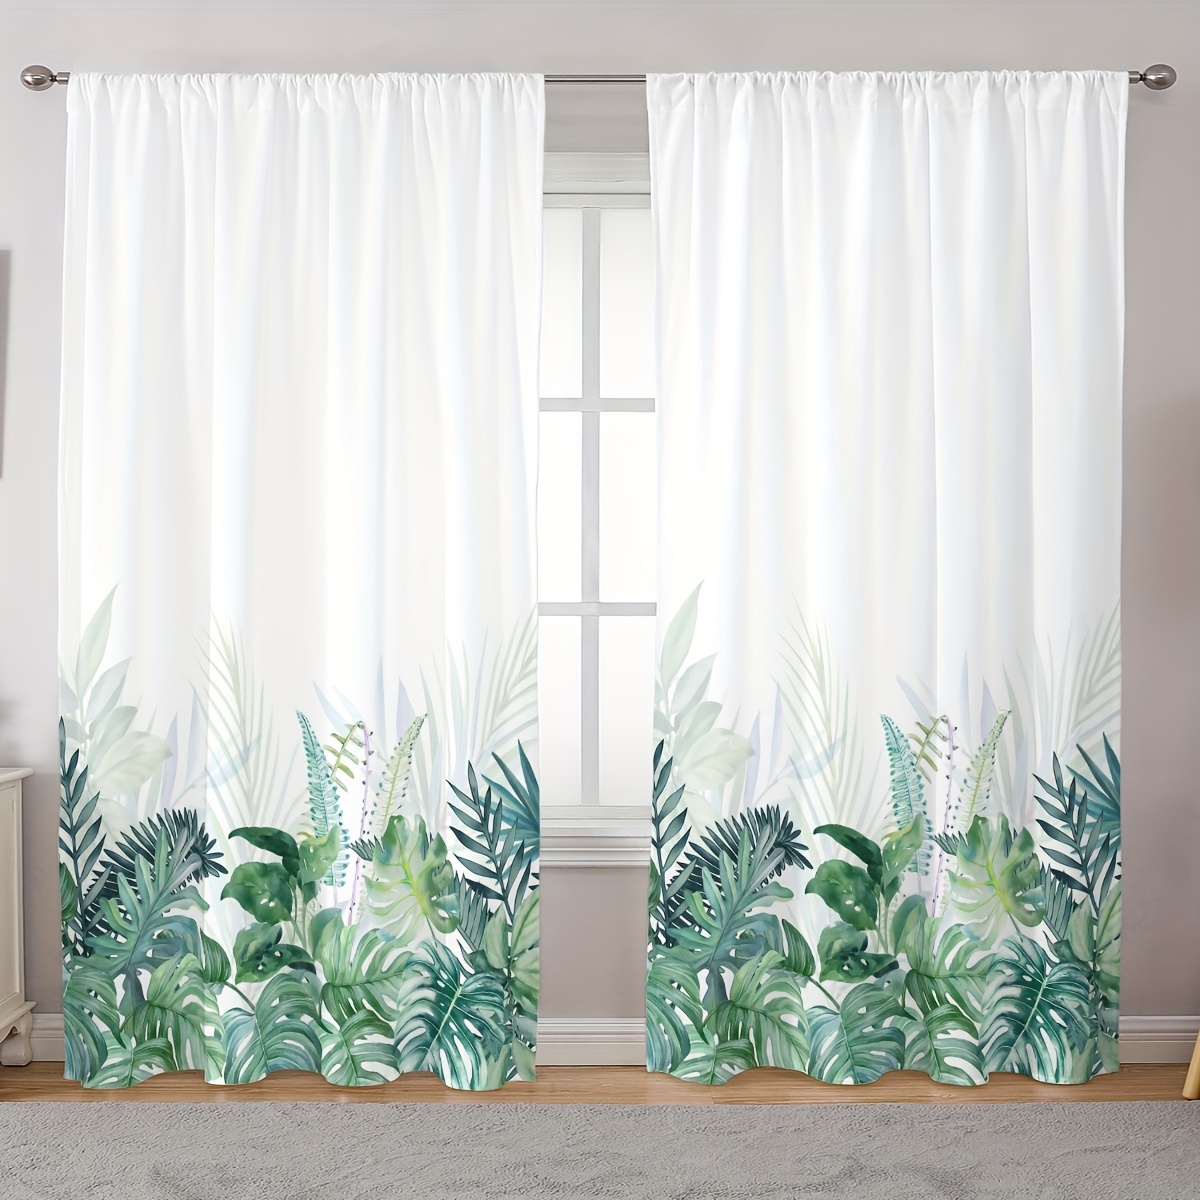 

2-piece Set Of Semi-sheer Floral & Plant Print Curtains - Rod Pocket Design For Easy Hanging, Perfect For Living Room, Bedroom, And Home Decor Curtains For Living Room Curtain Rods For Living Room